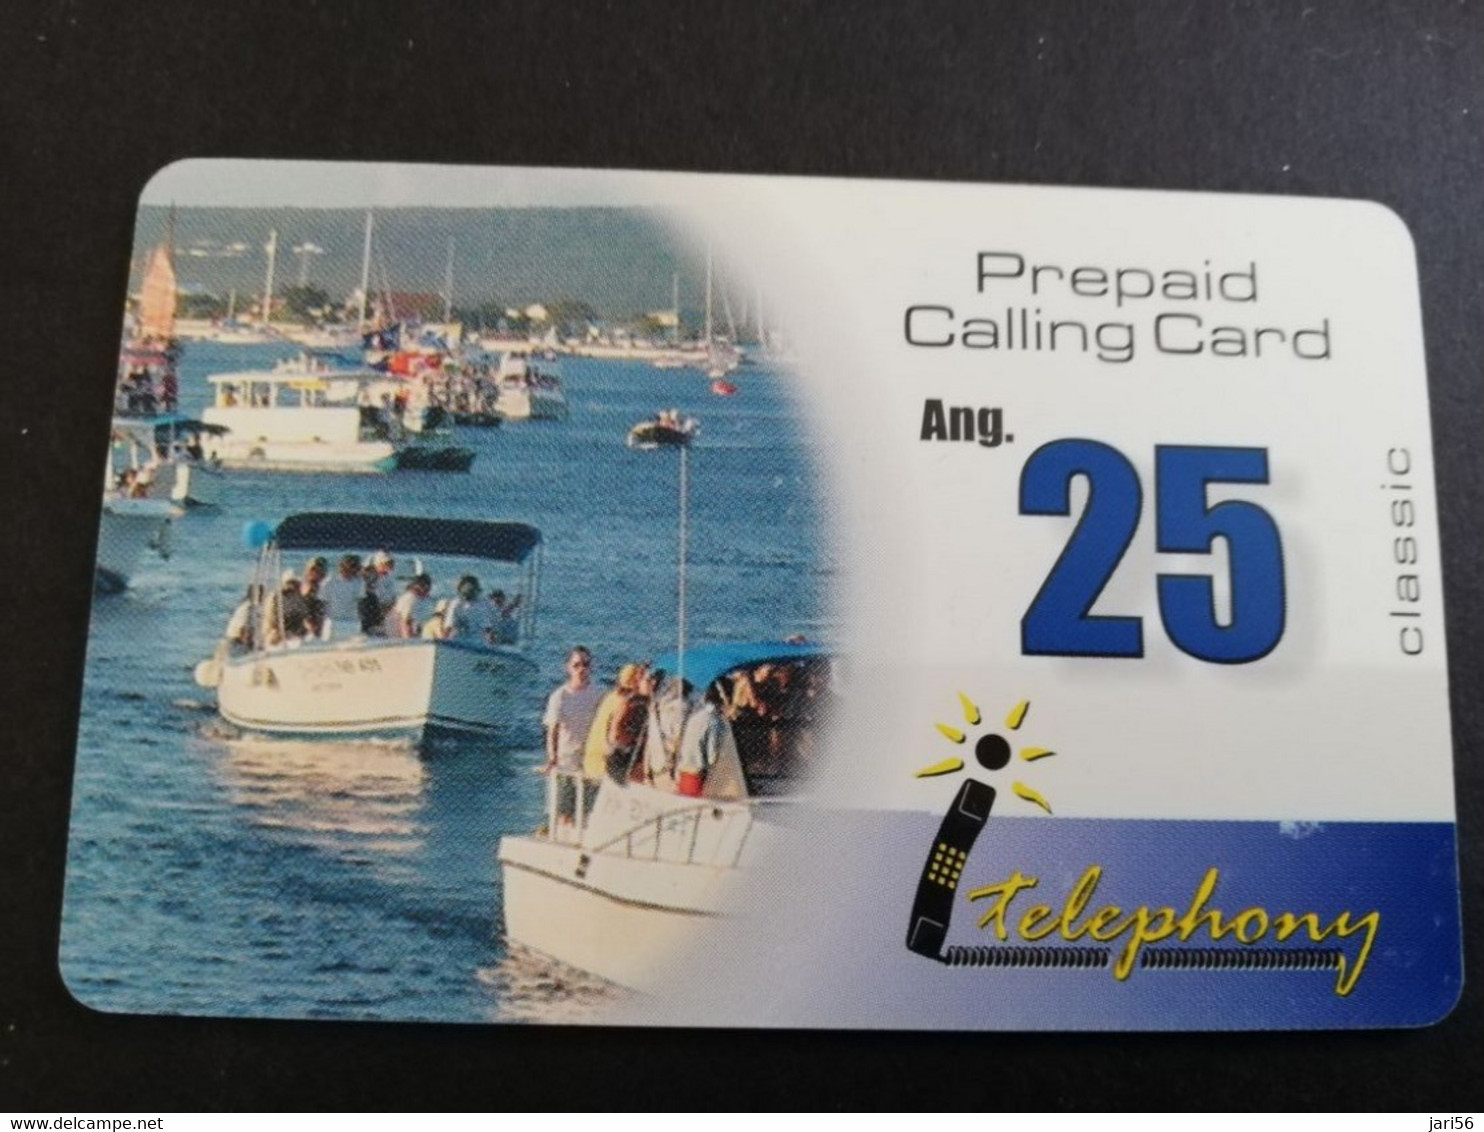 CURACAO PREPAIDS NAF 25,- I-TELEPHONY  BOATS (THICK CARD)  VERY FINE USED CARD        ** 5305AA** - Antilles (Netherlands)